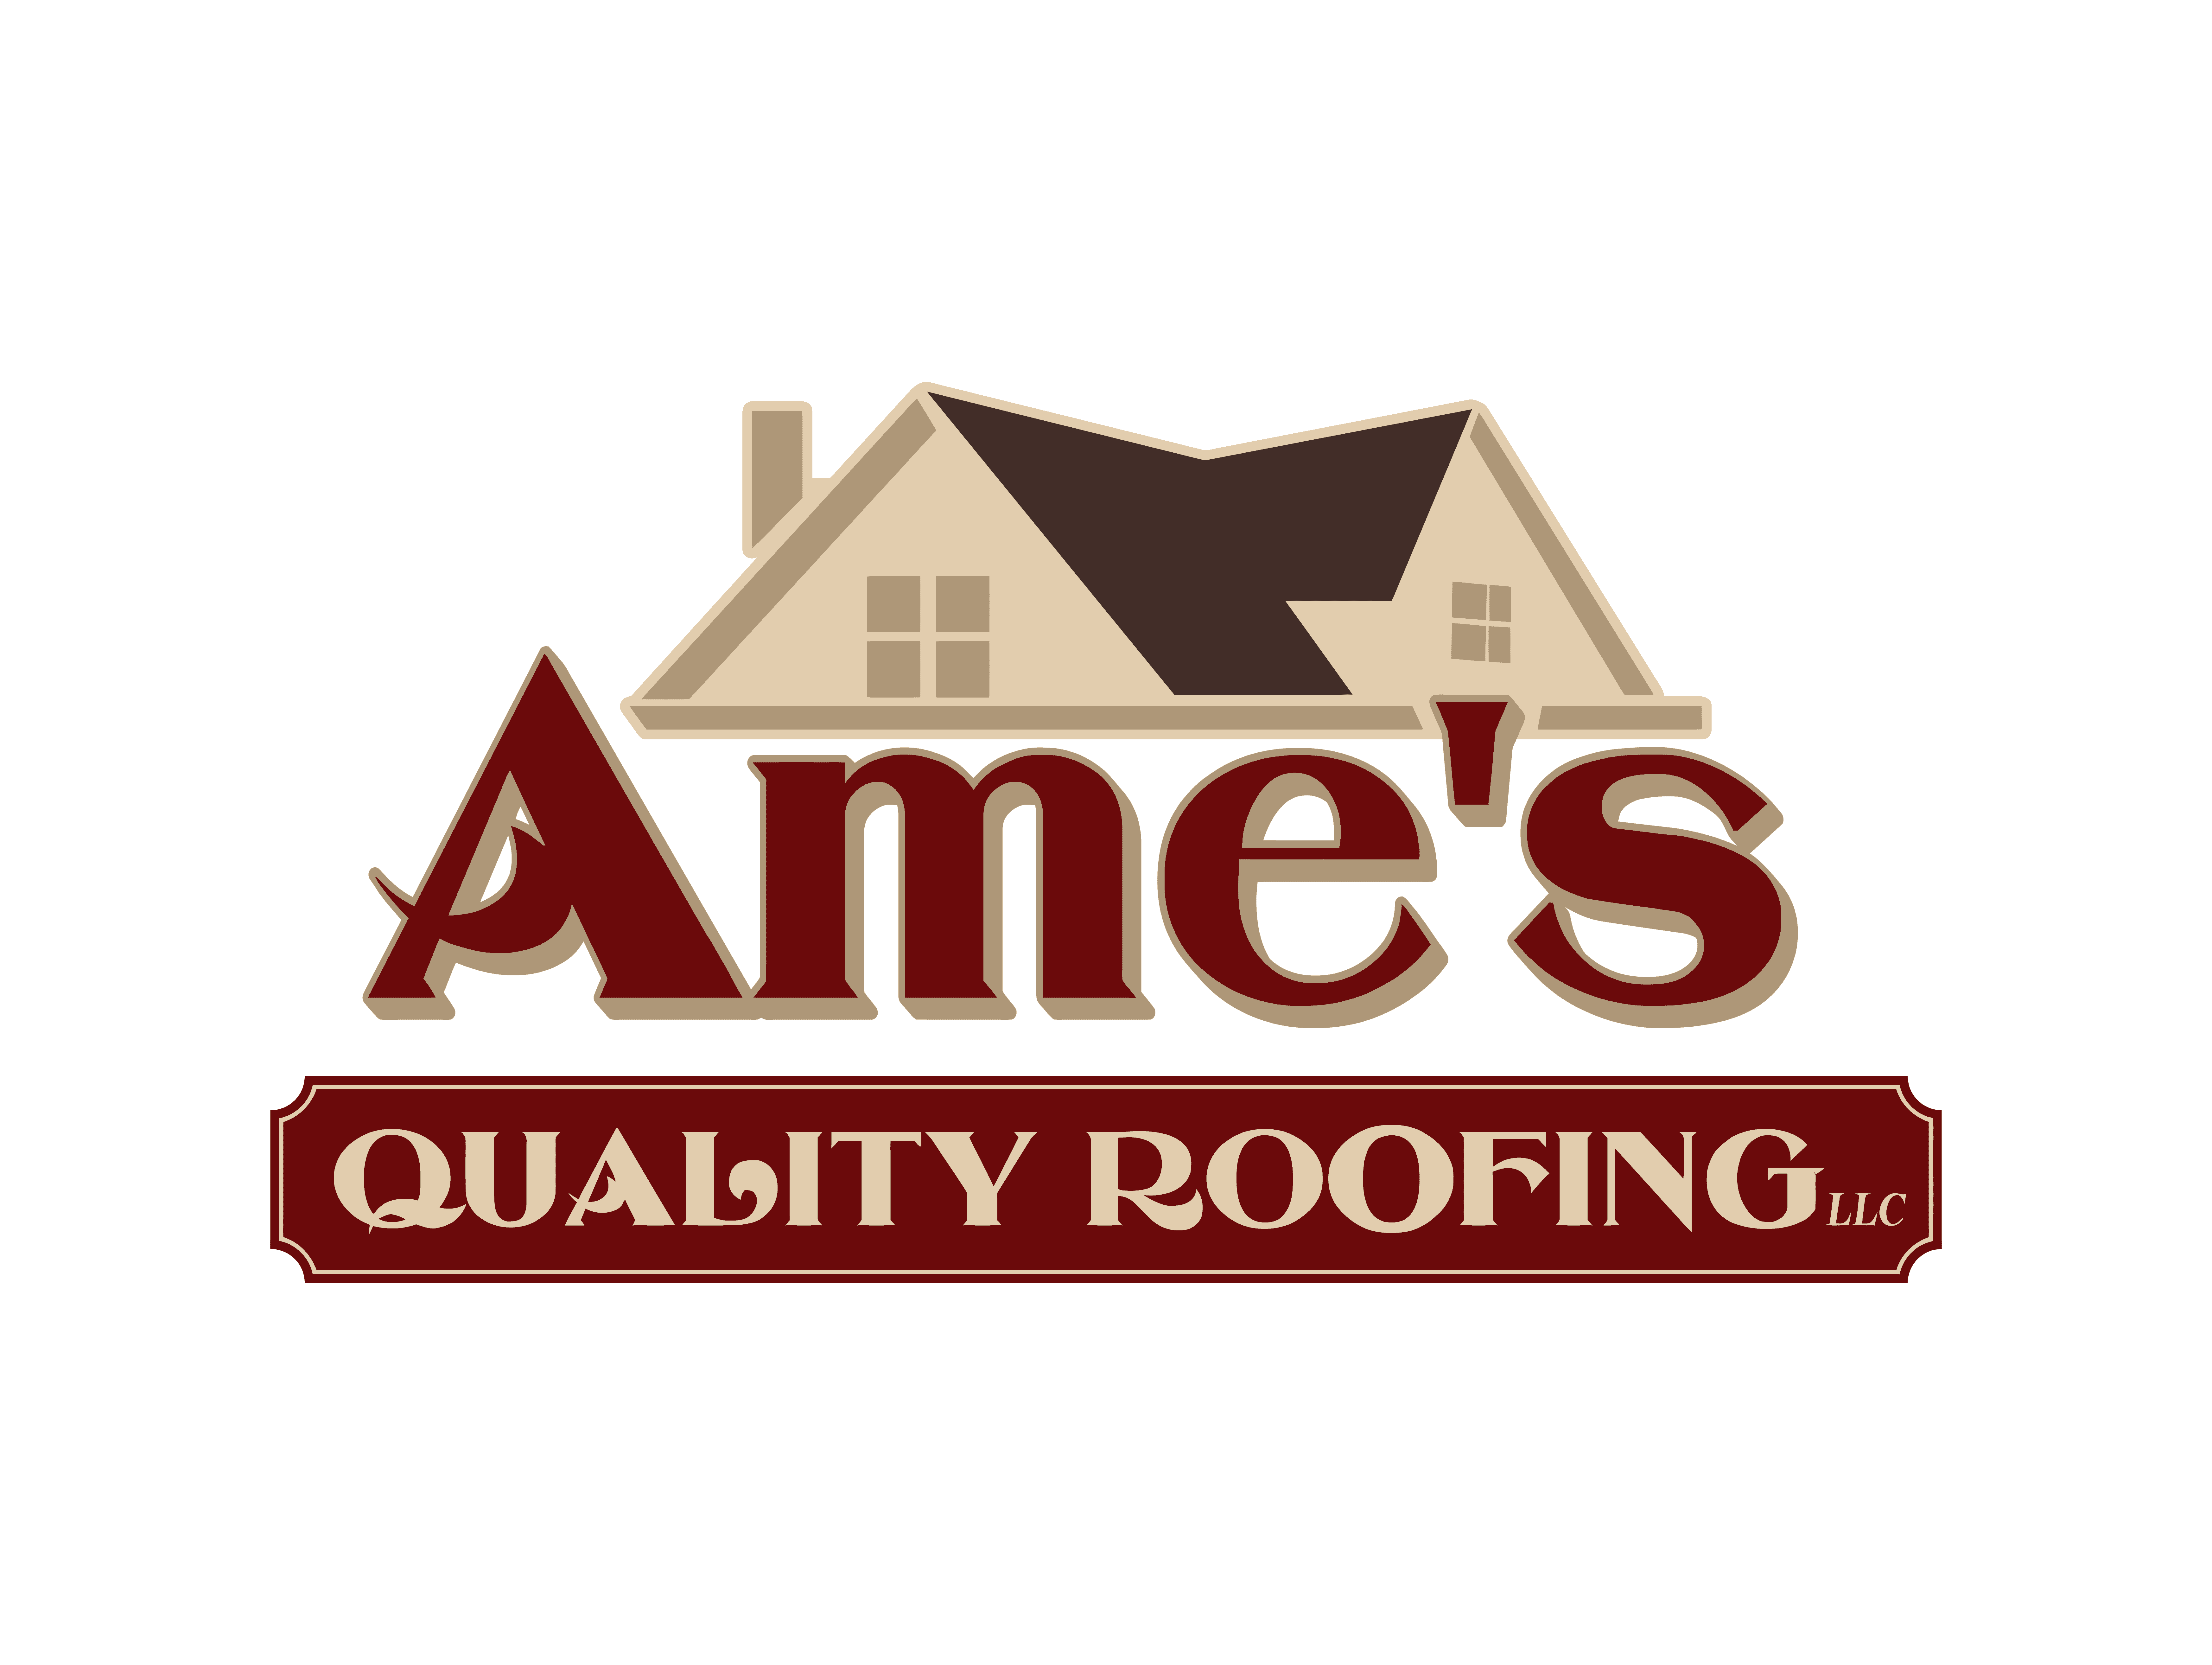 Ame's Quality Roofing's logo